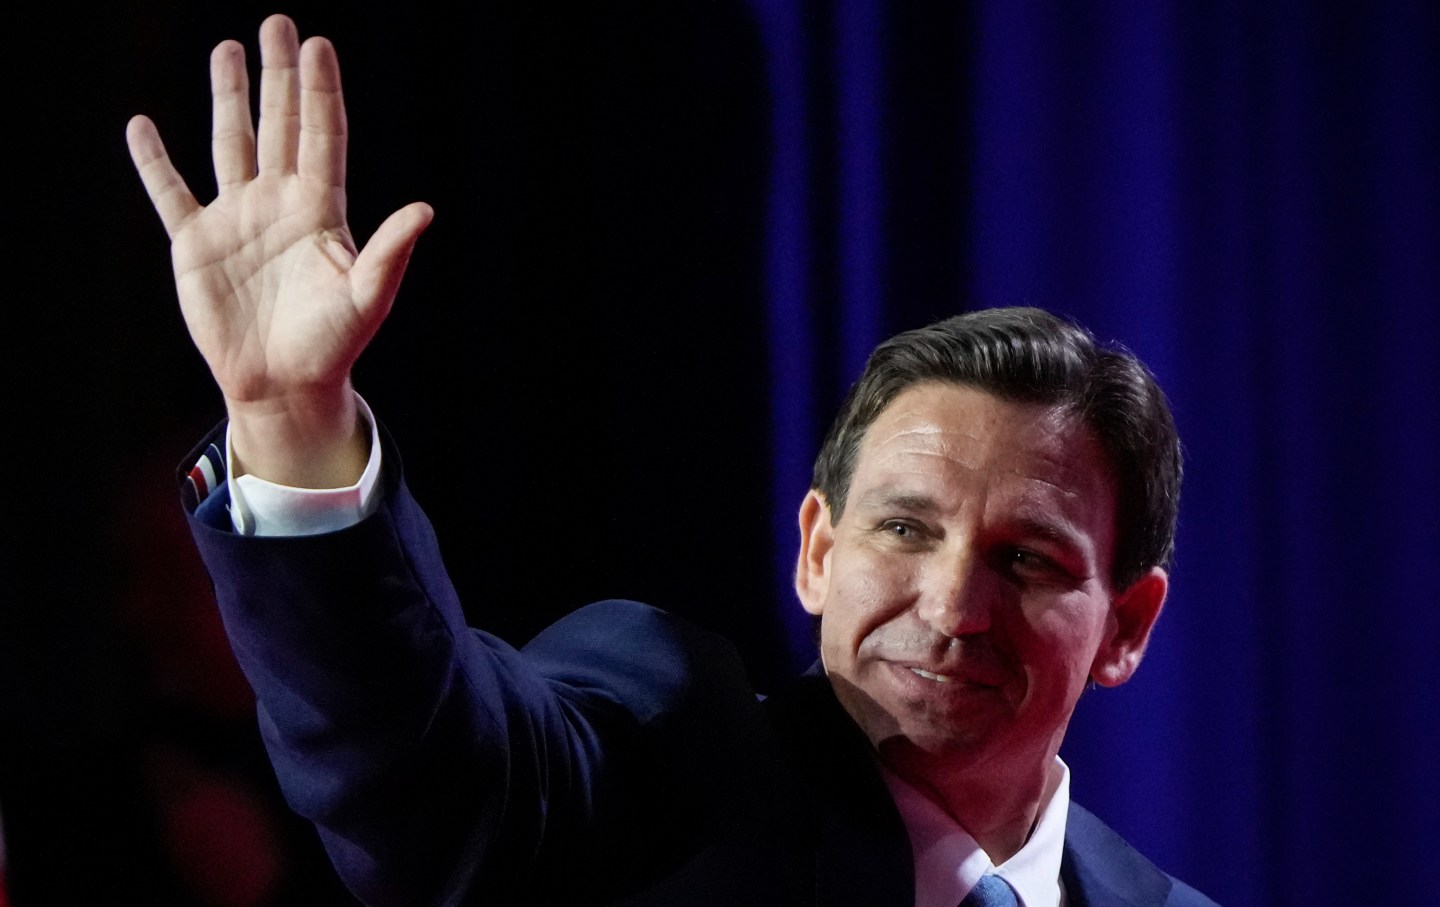 Governor of Florida Ron DeSantis waves as he departs the stage.